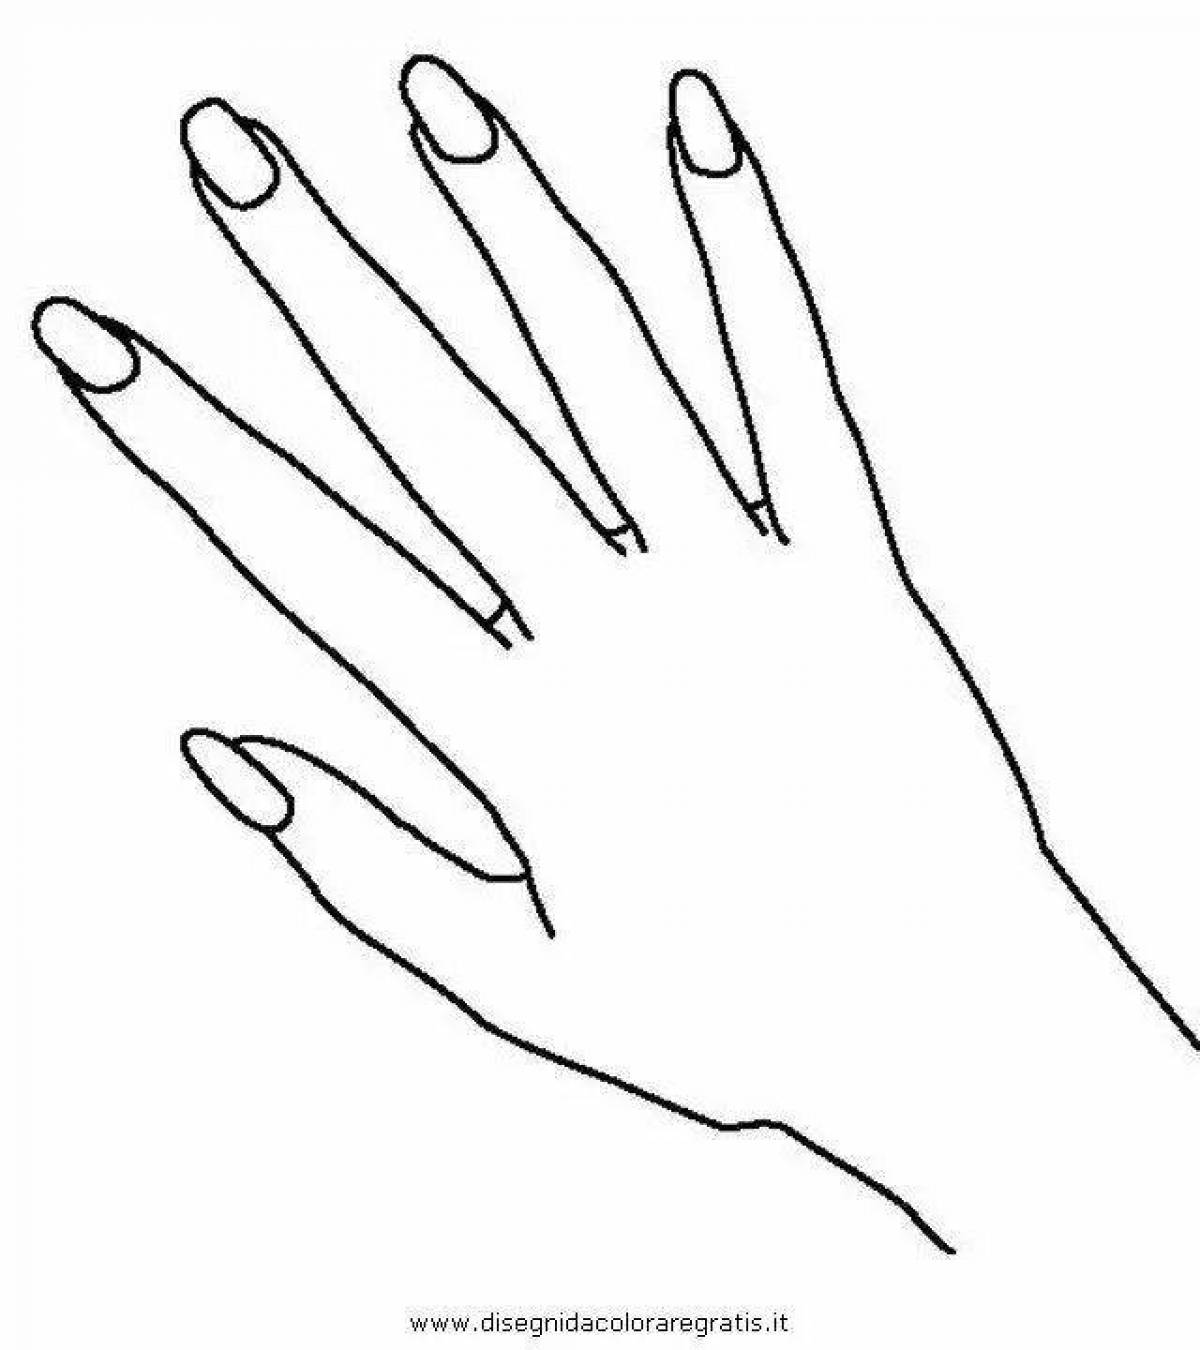 Coloring book decorated hand with long nails